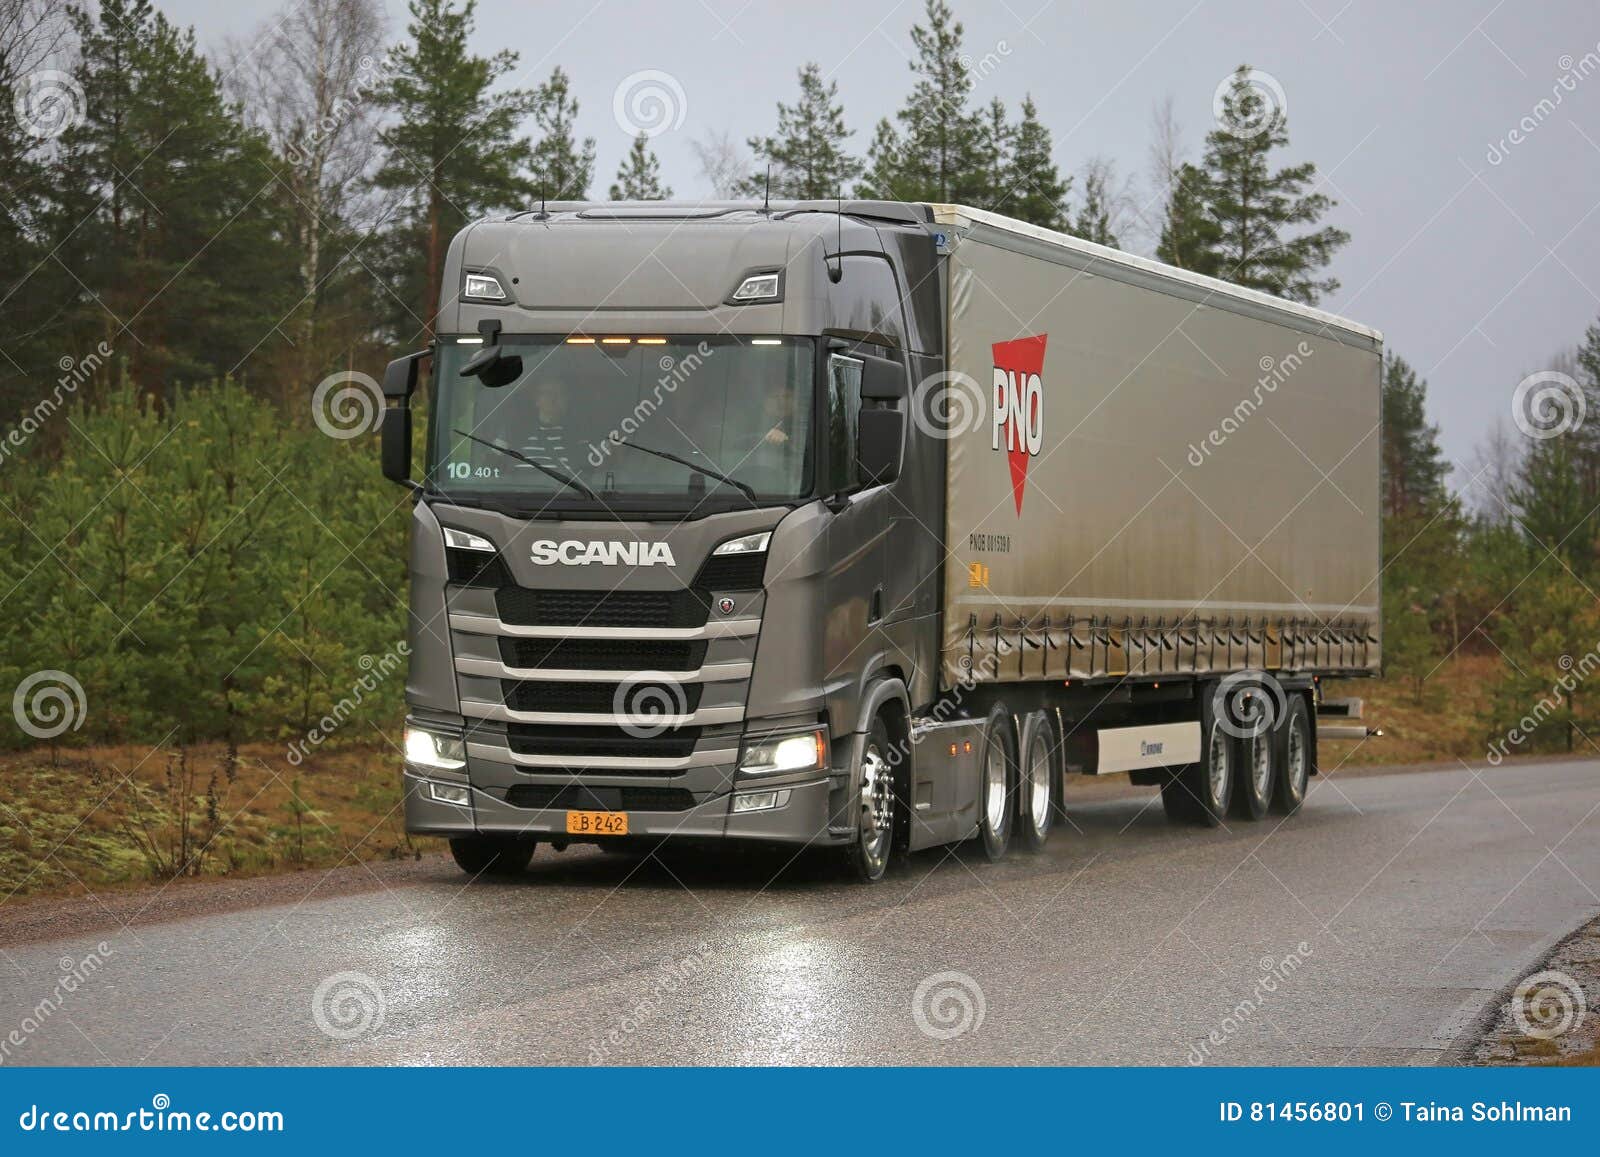 Next Generation Scania Semi Truck On Rural Highway Editorial Photo  Image: 81456801